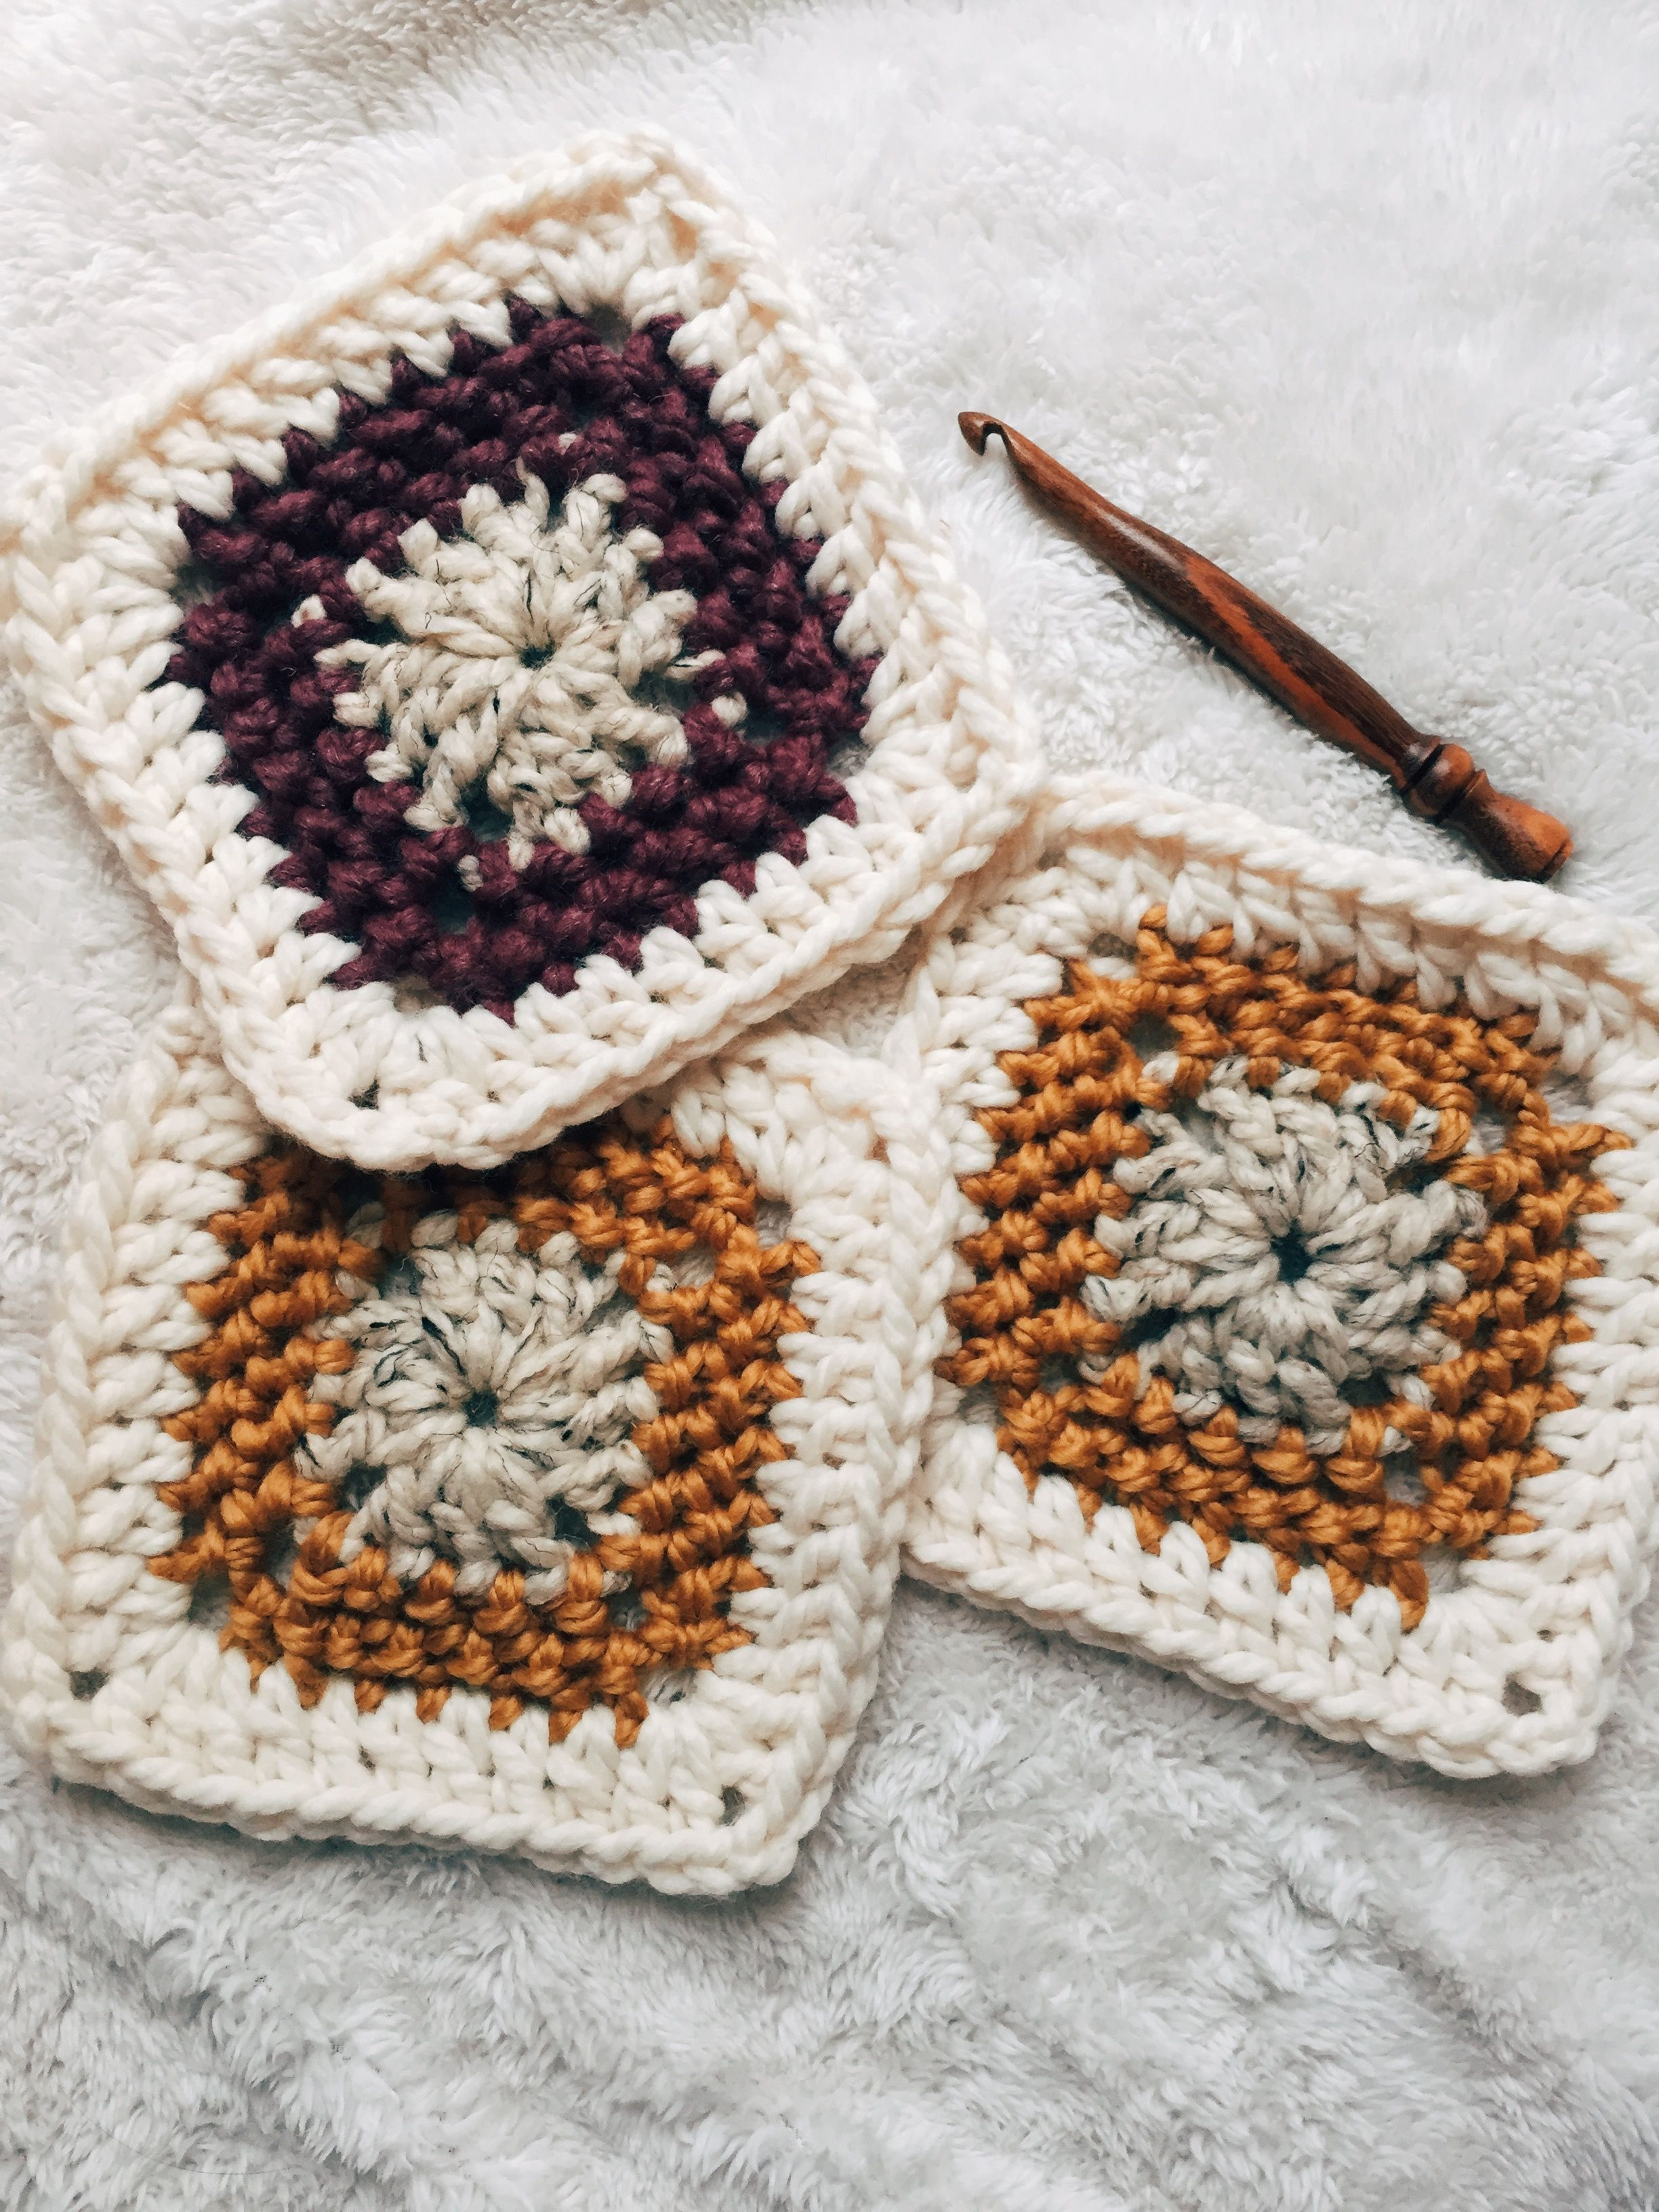 How To Follow A Crochet Pattern An Easy To Follow Guide To Creating Your Very Own Chunky Crocheted